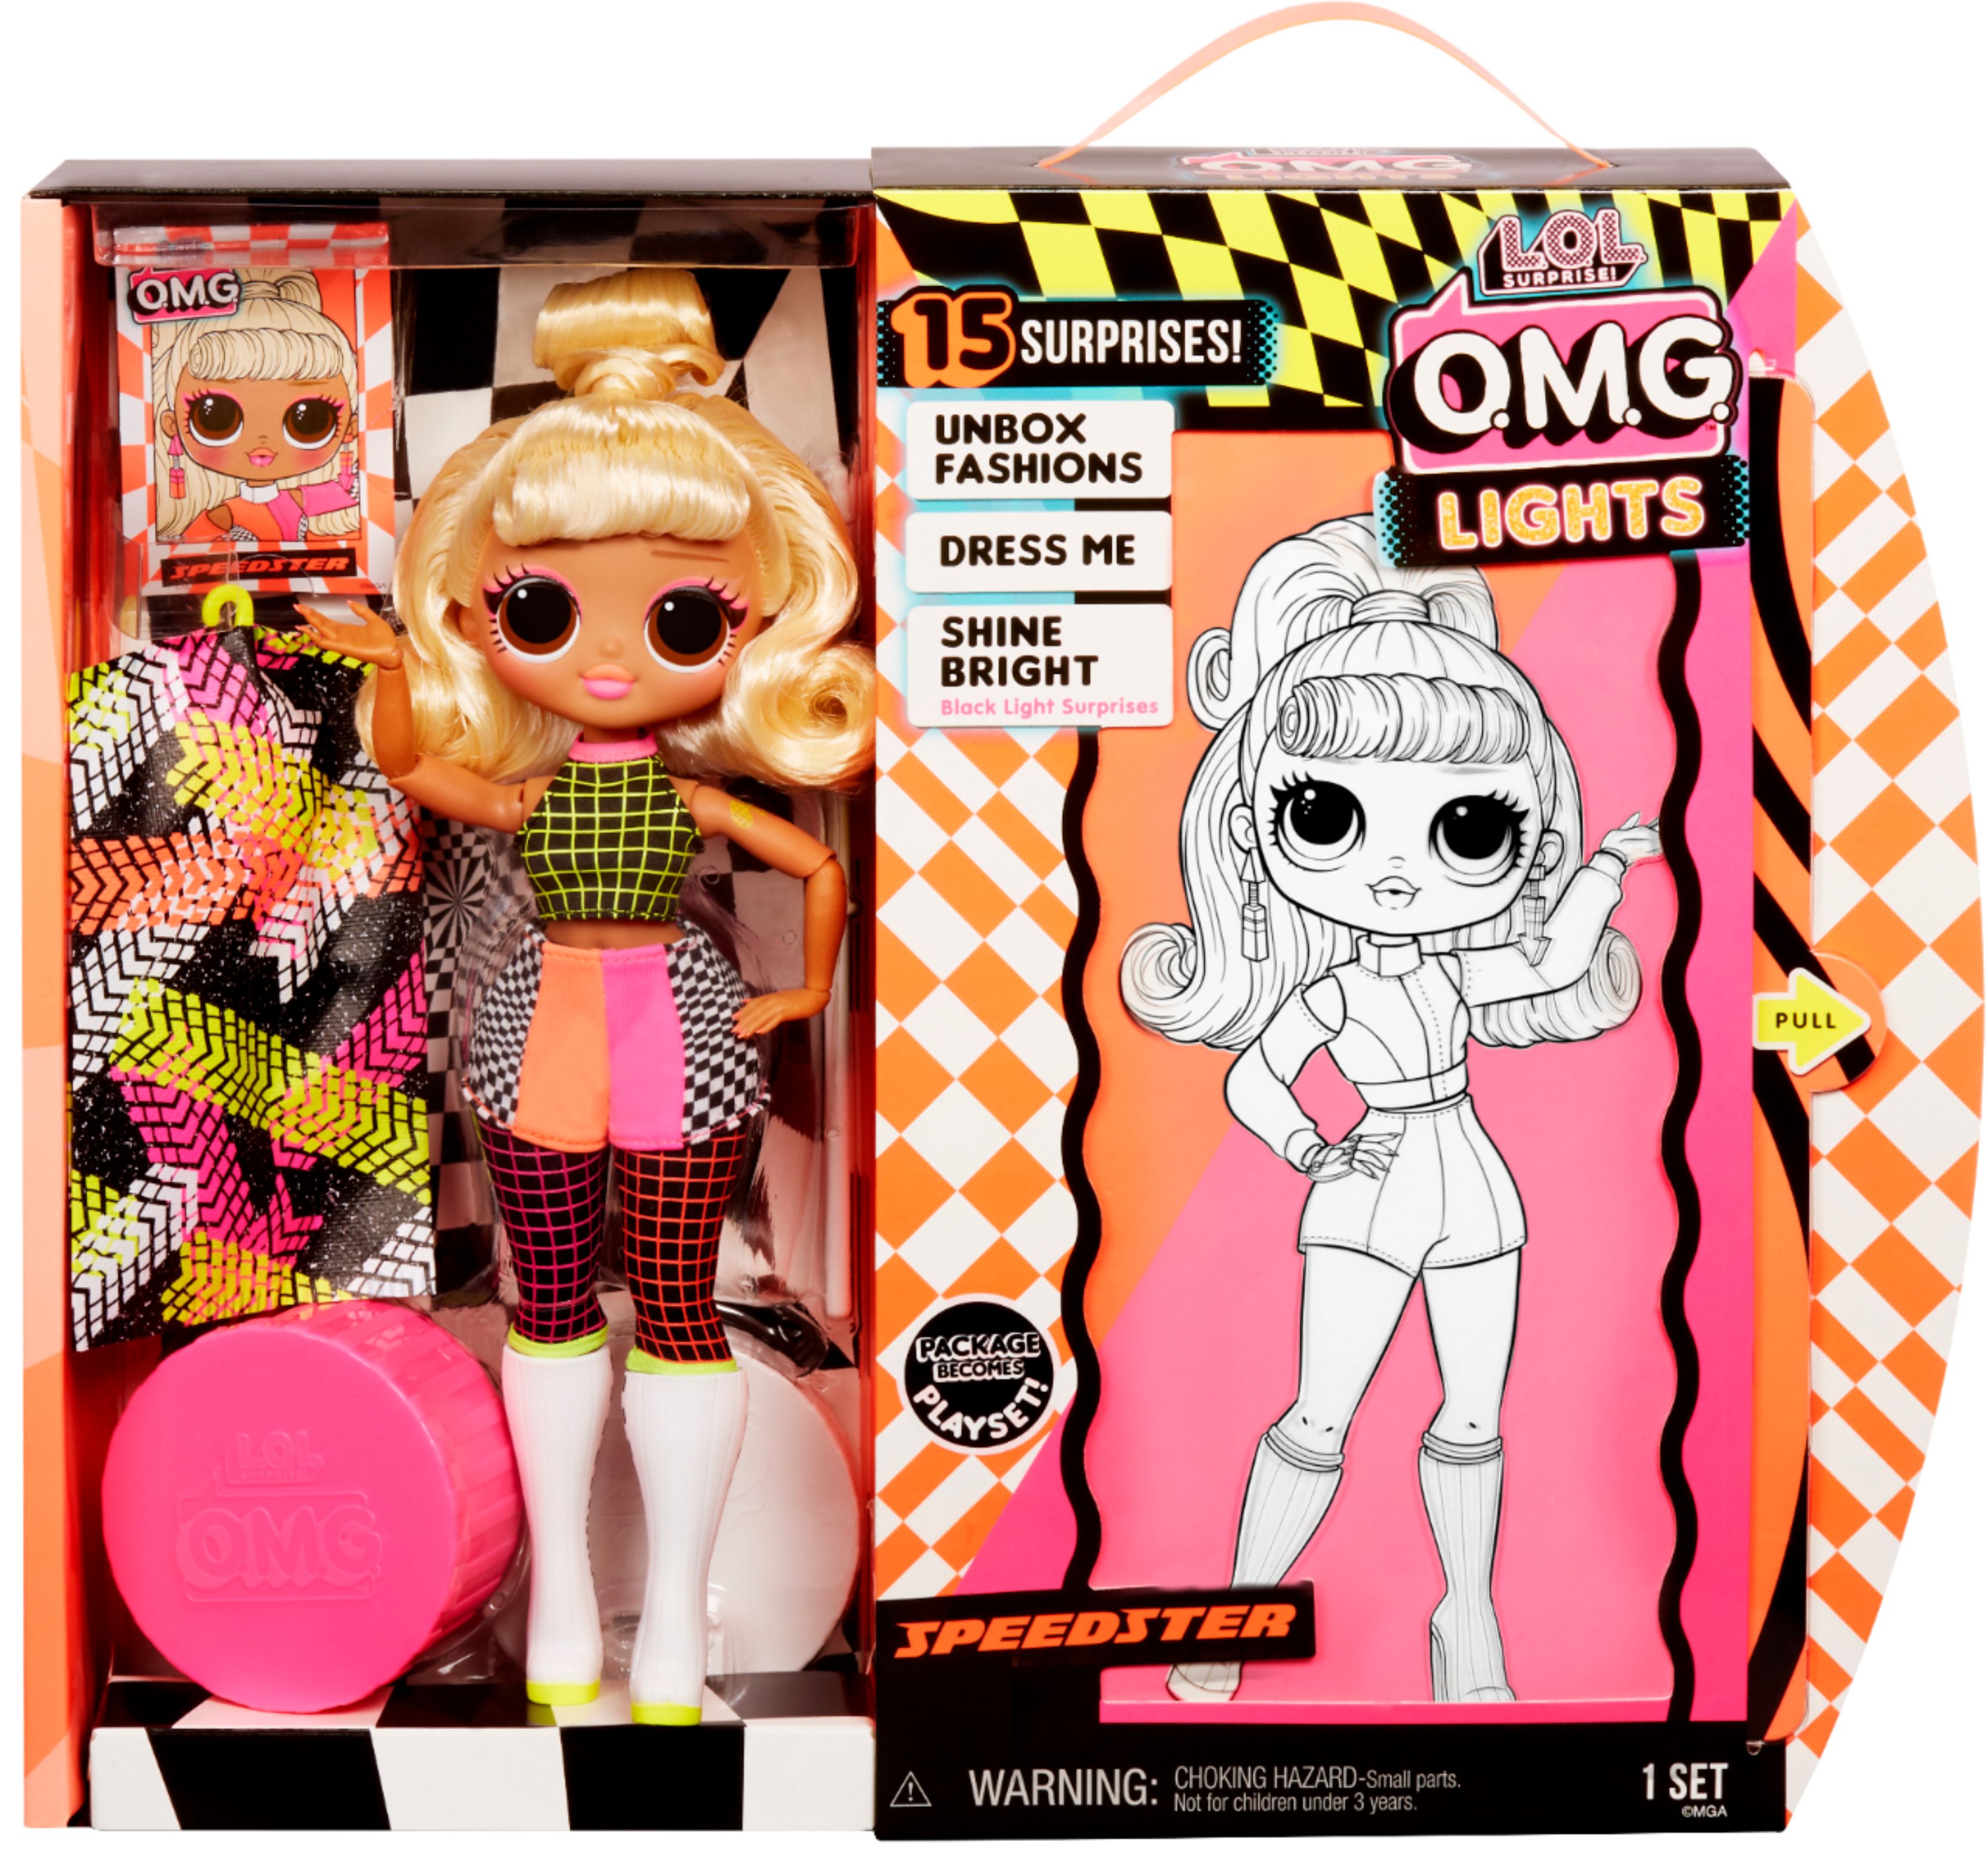 New LOL Surprise OMG LIGHTS Speedster Fashion Doll With 15 Surprises